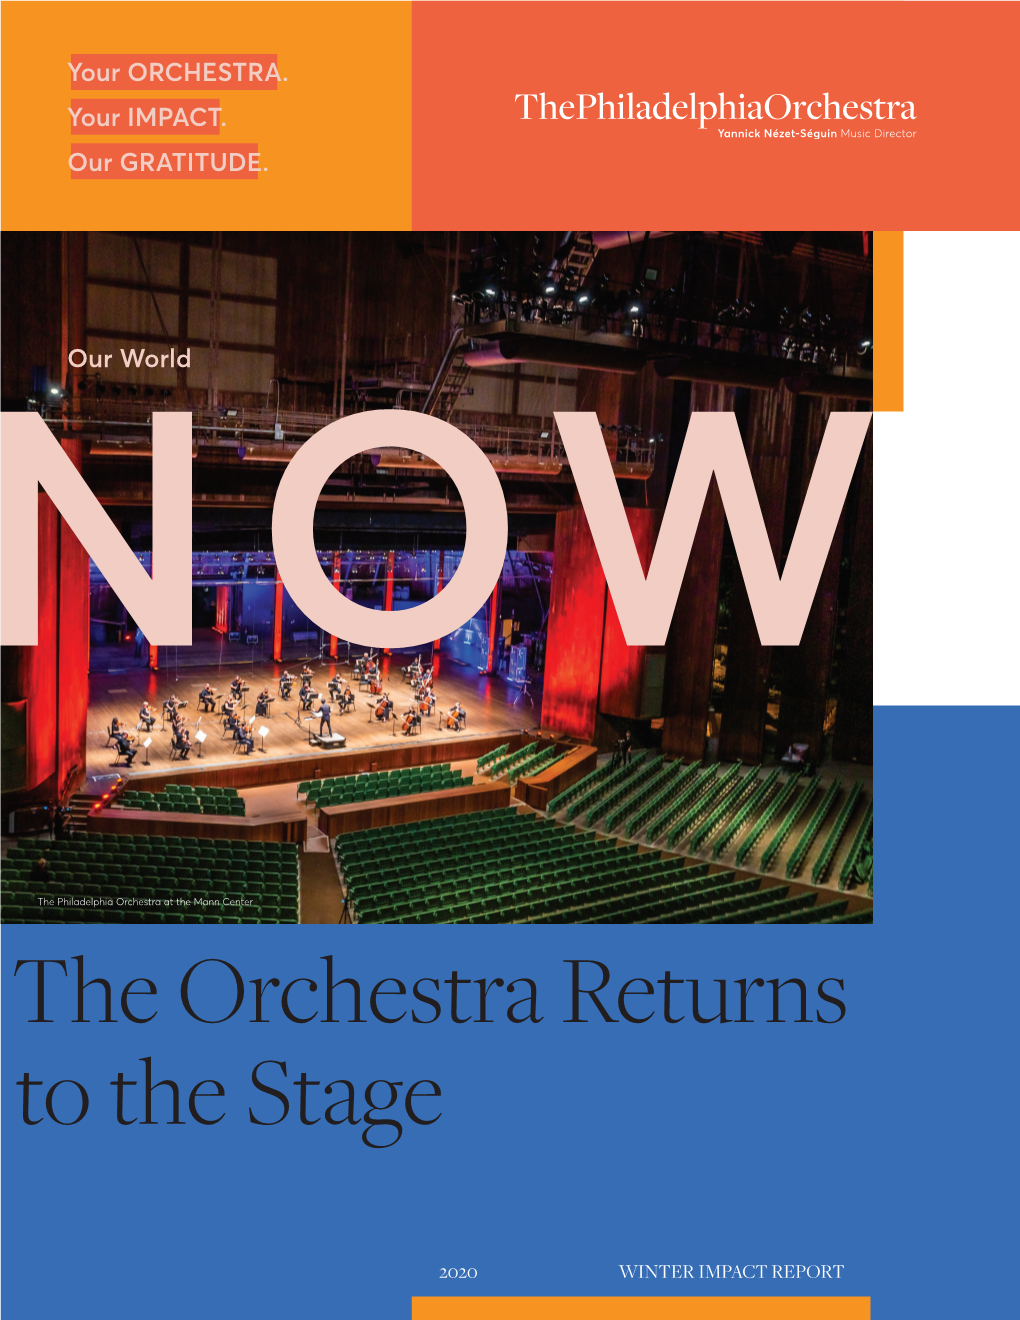 The Orchestra Returns to the Stage